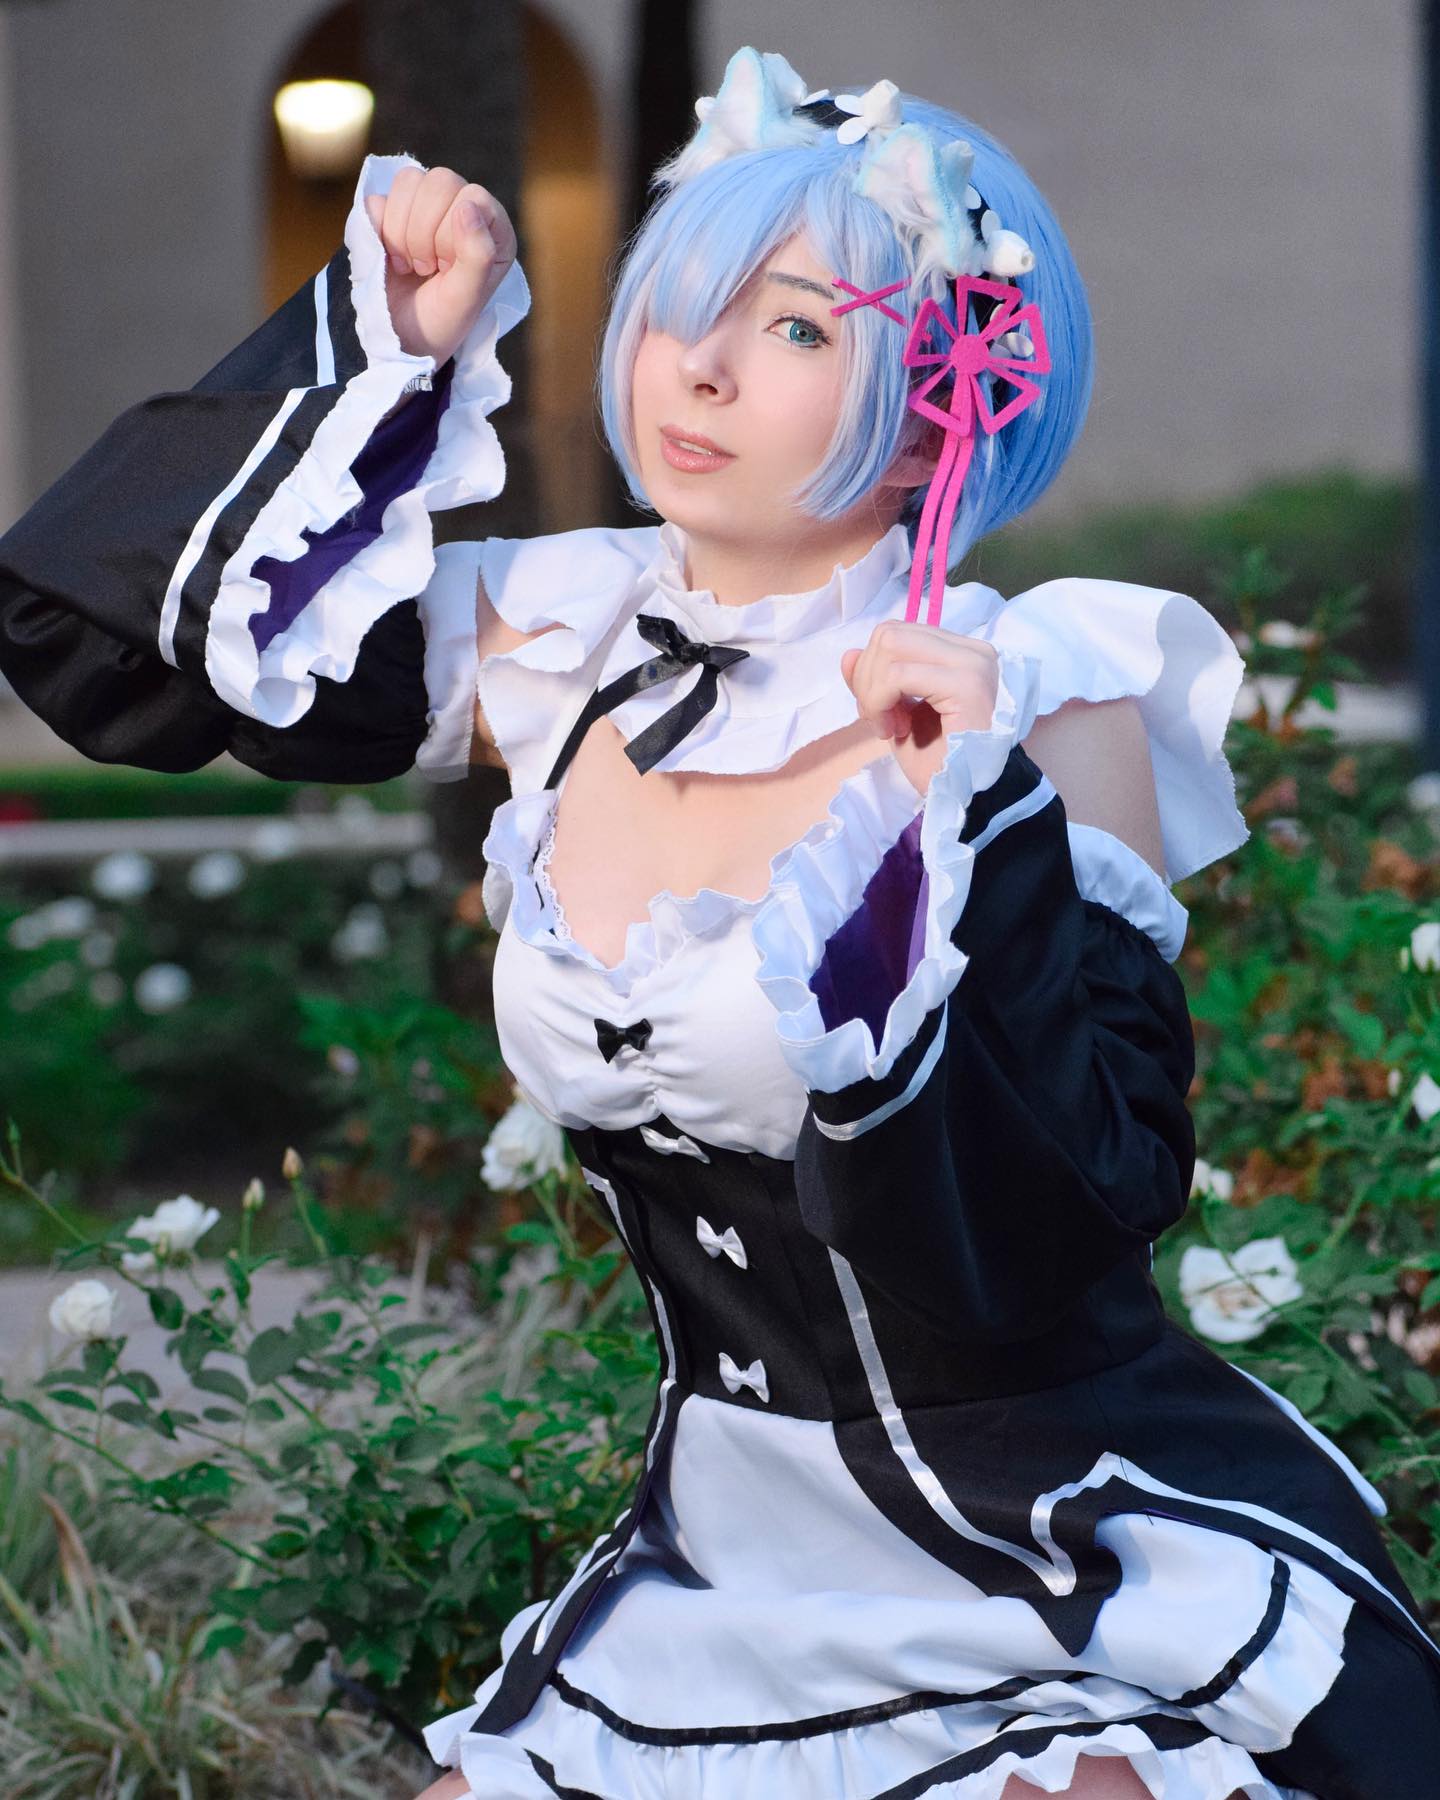 Rem from Re:Zero 💙 Who’s looking for a wholesome cat girl? 🐱

#rezero #rem #remcosplay #anime #animegirl anime cosplay maid dress